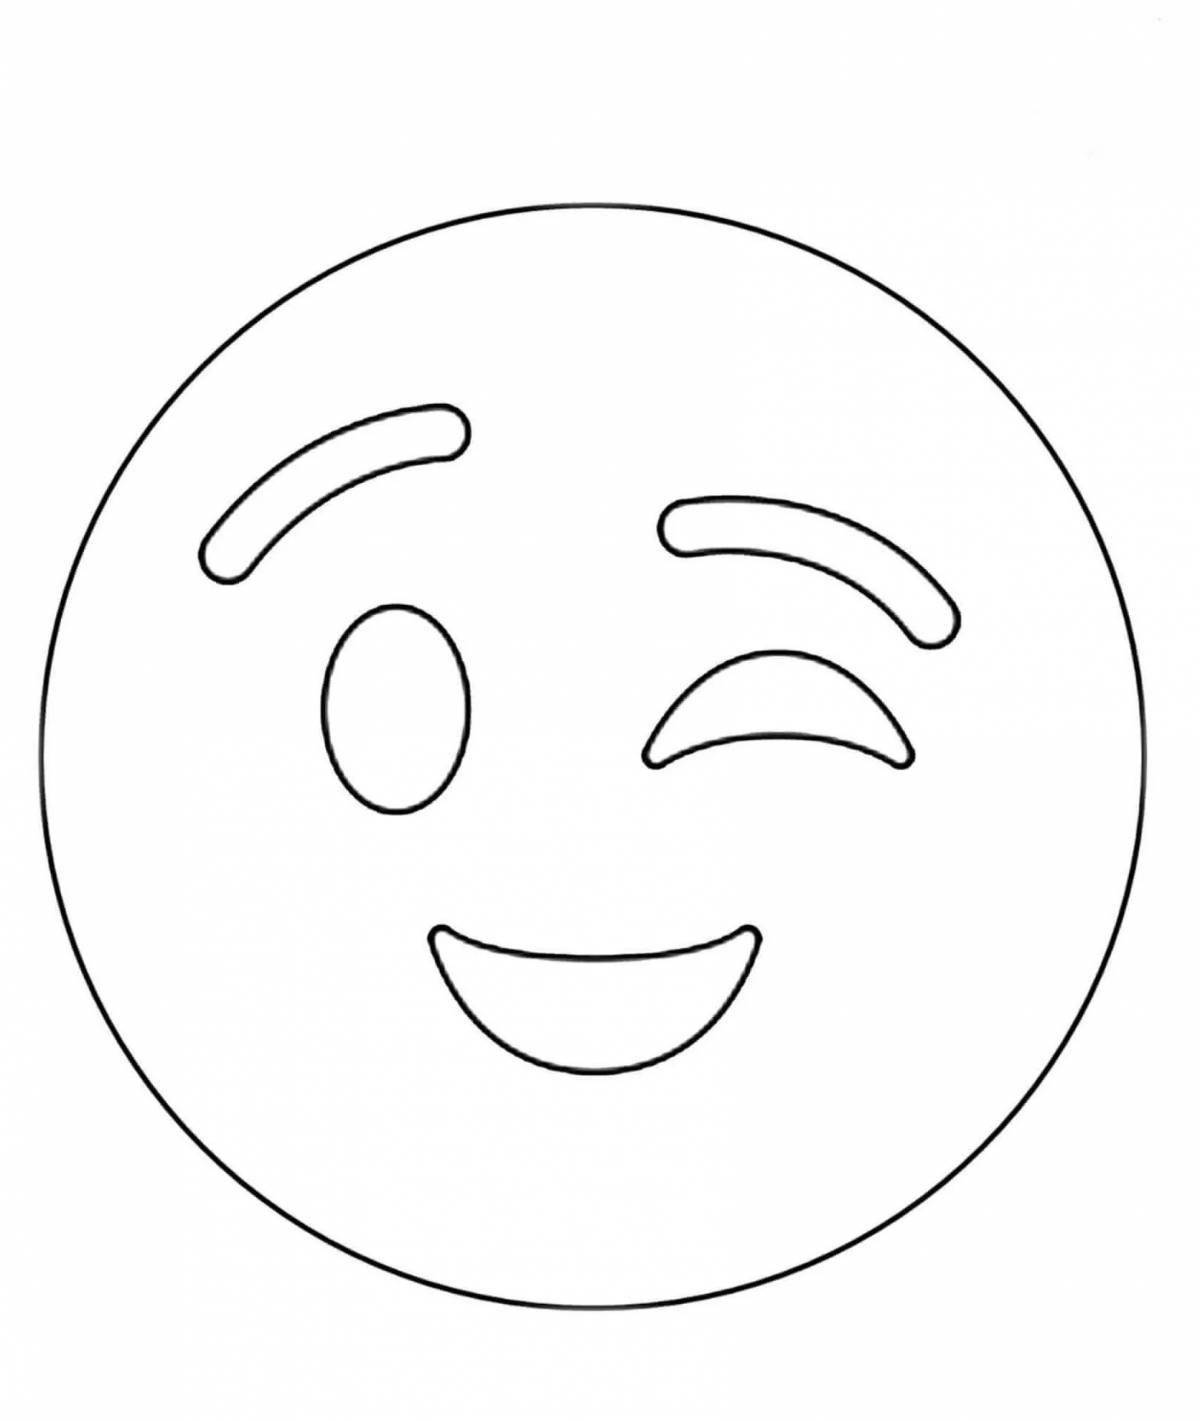 Adorable emoji coloring page for kids